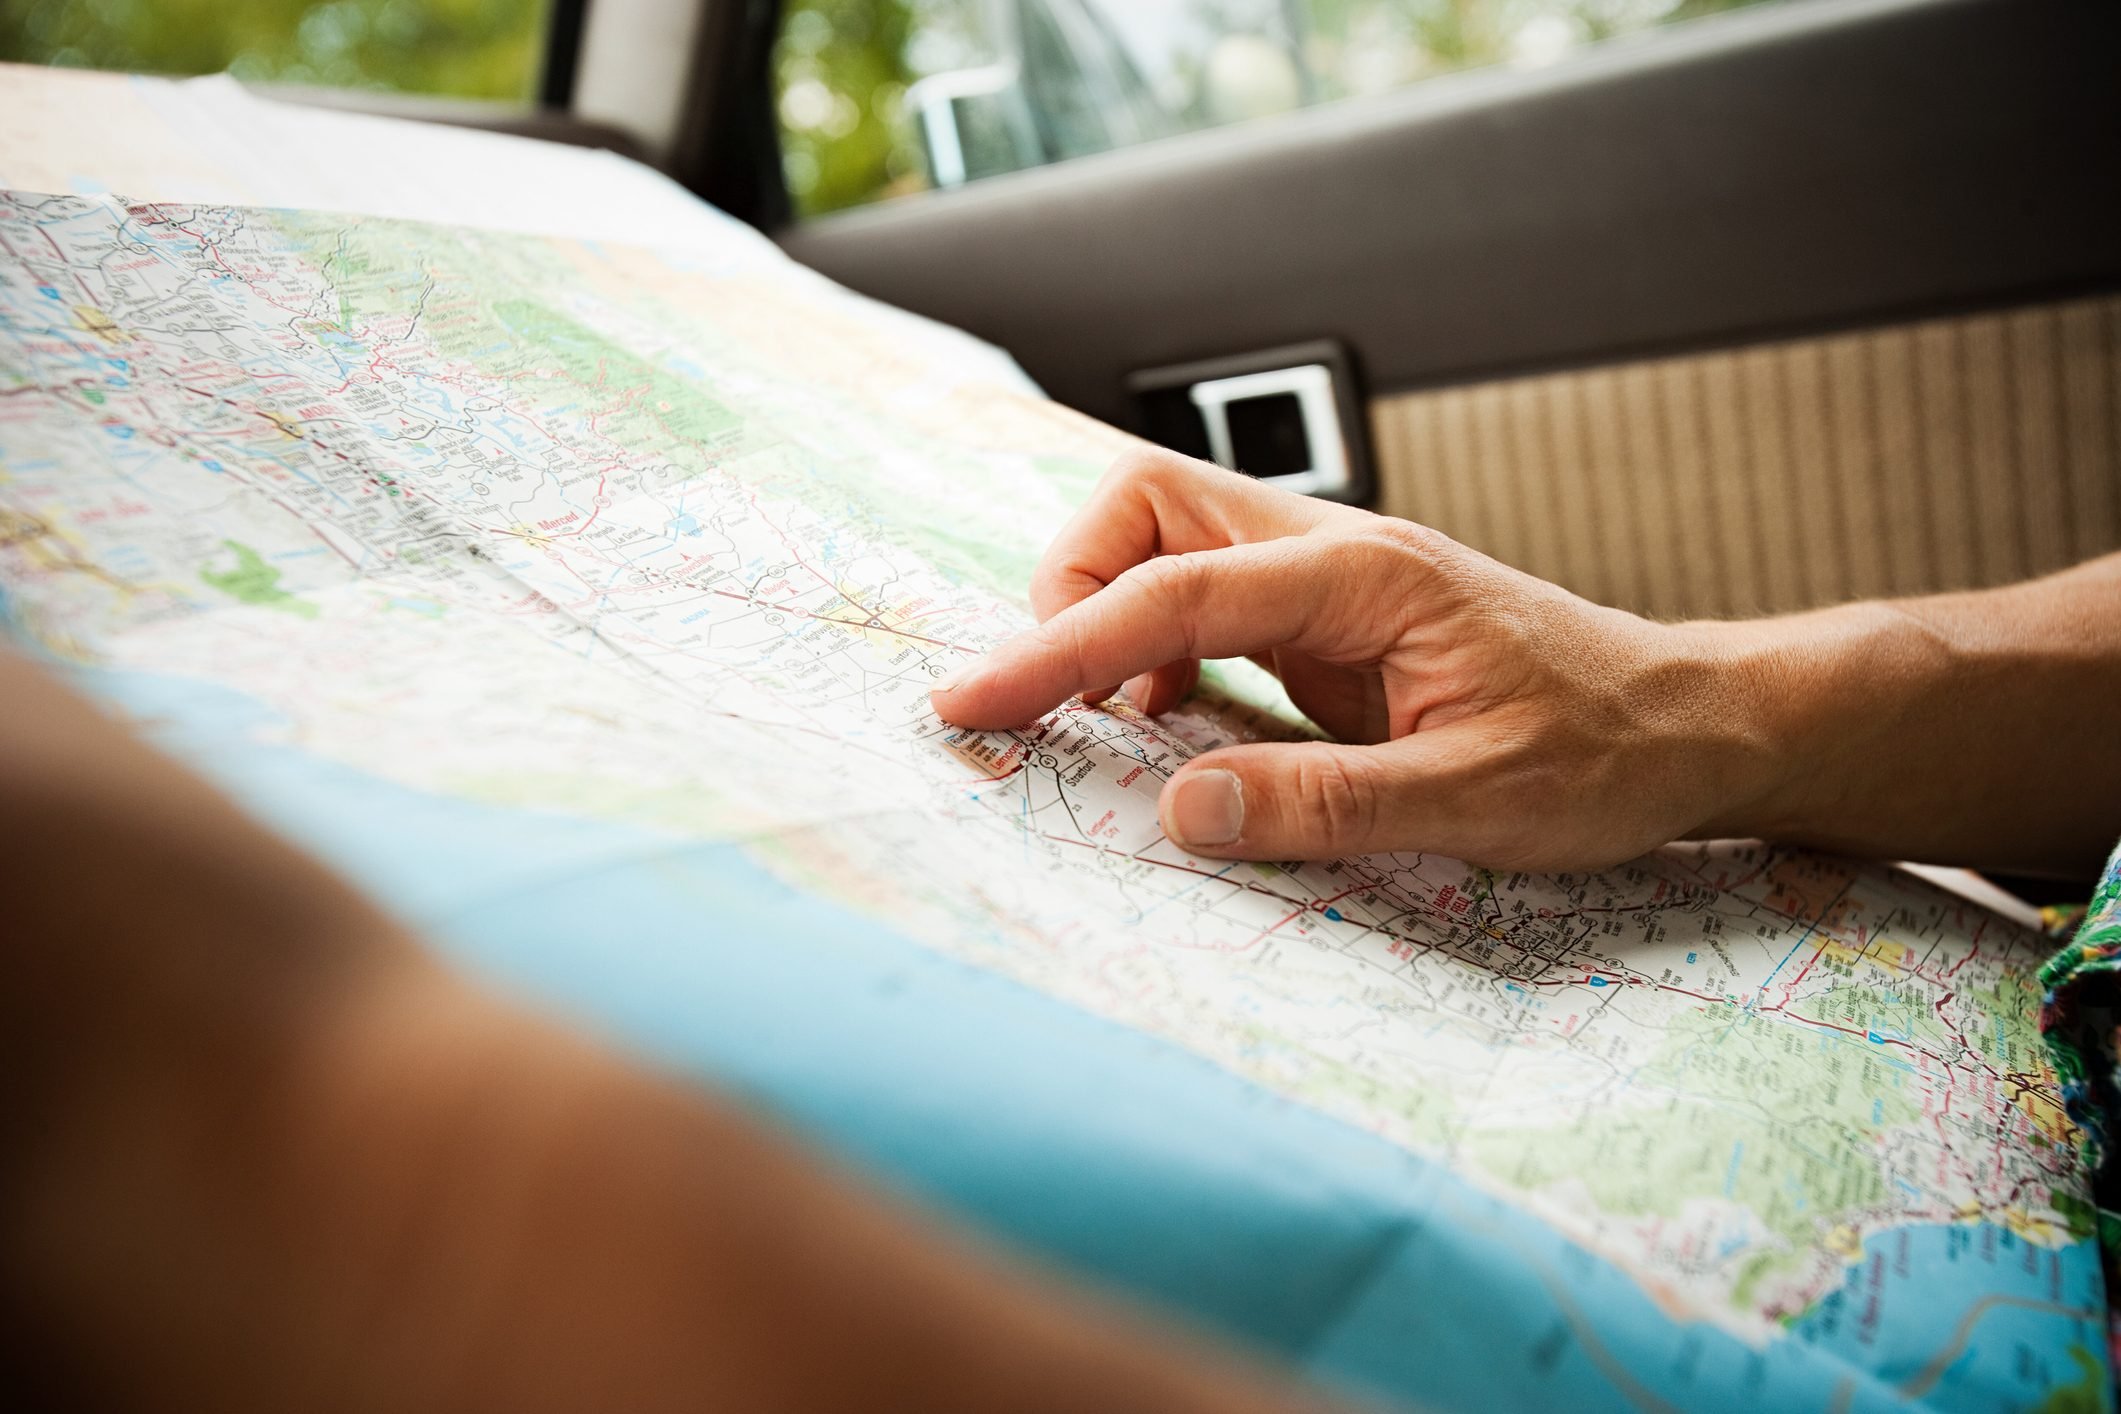 close up of hands examing a map in the car